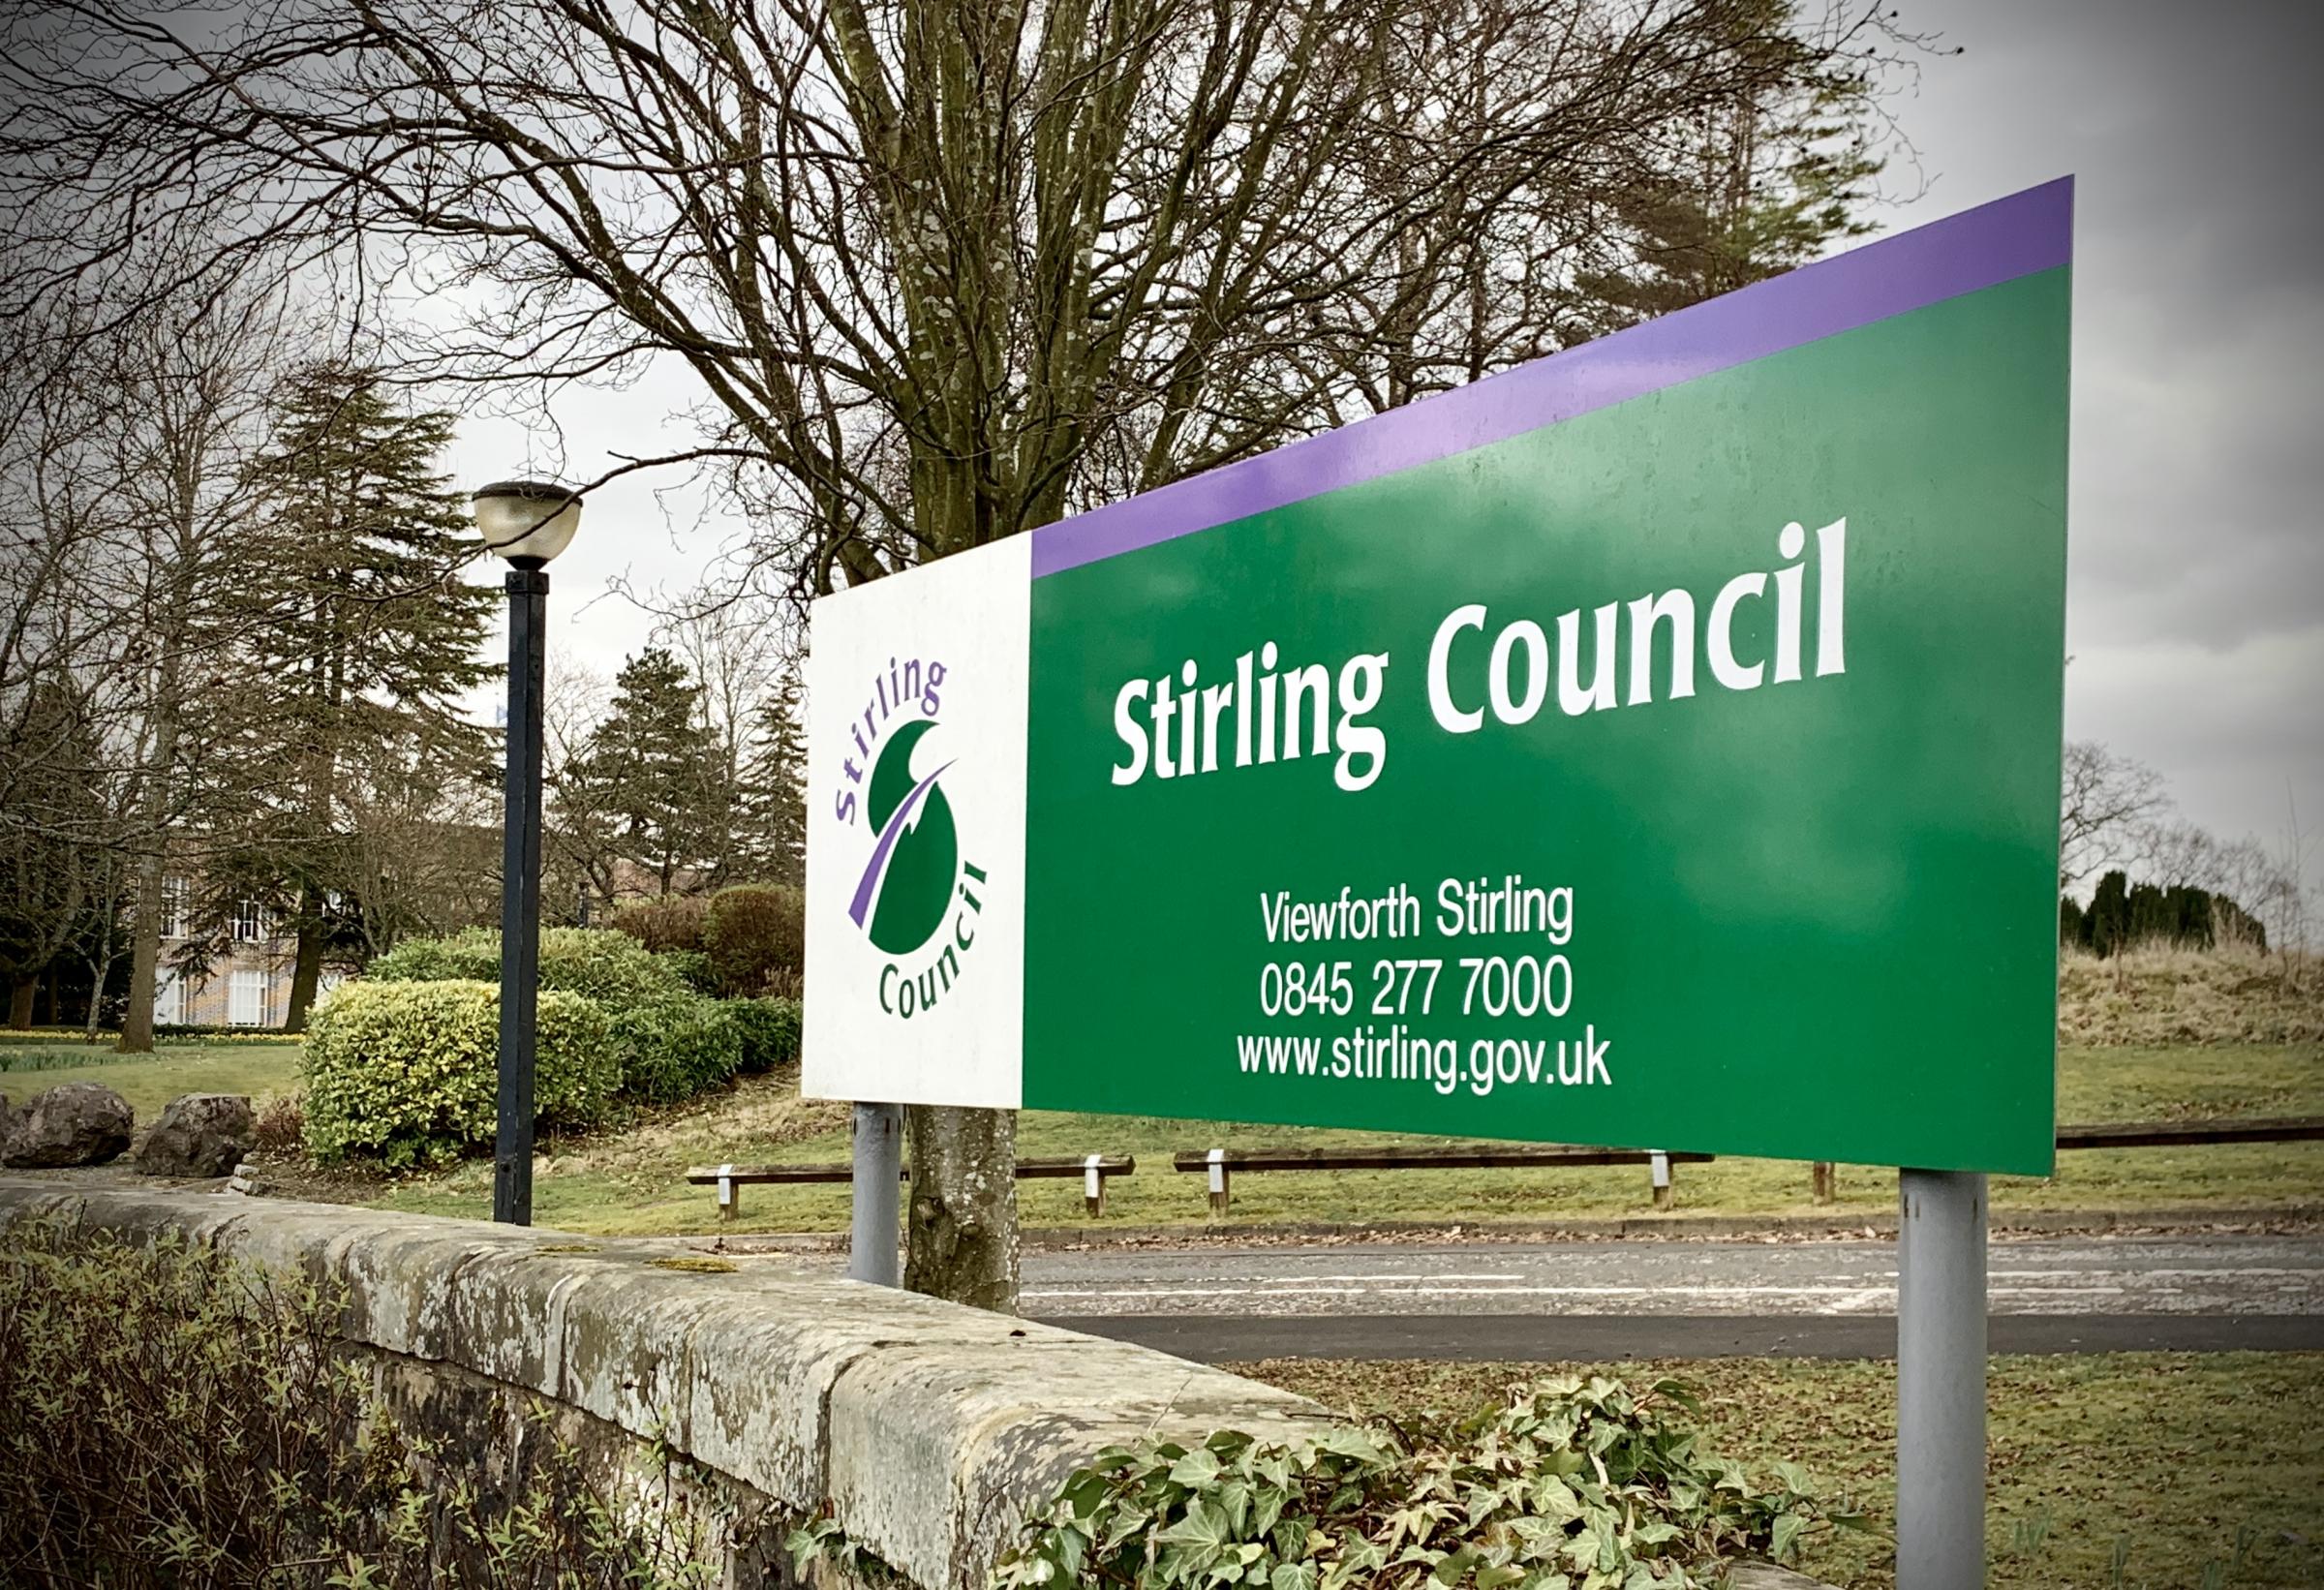 Stirling Council is one of the three partners in the joint board